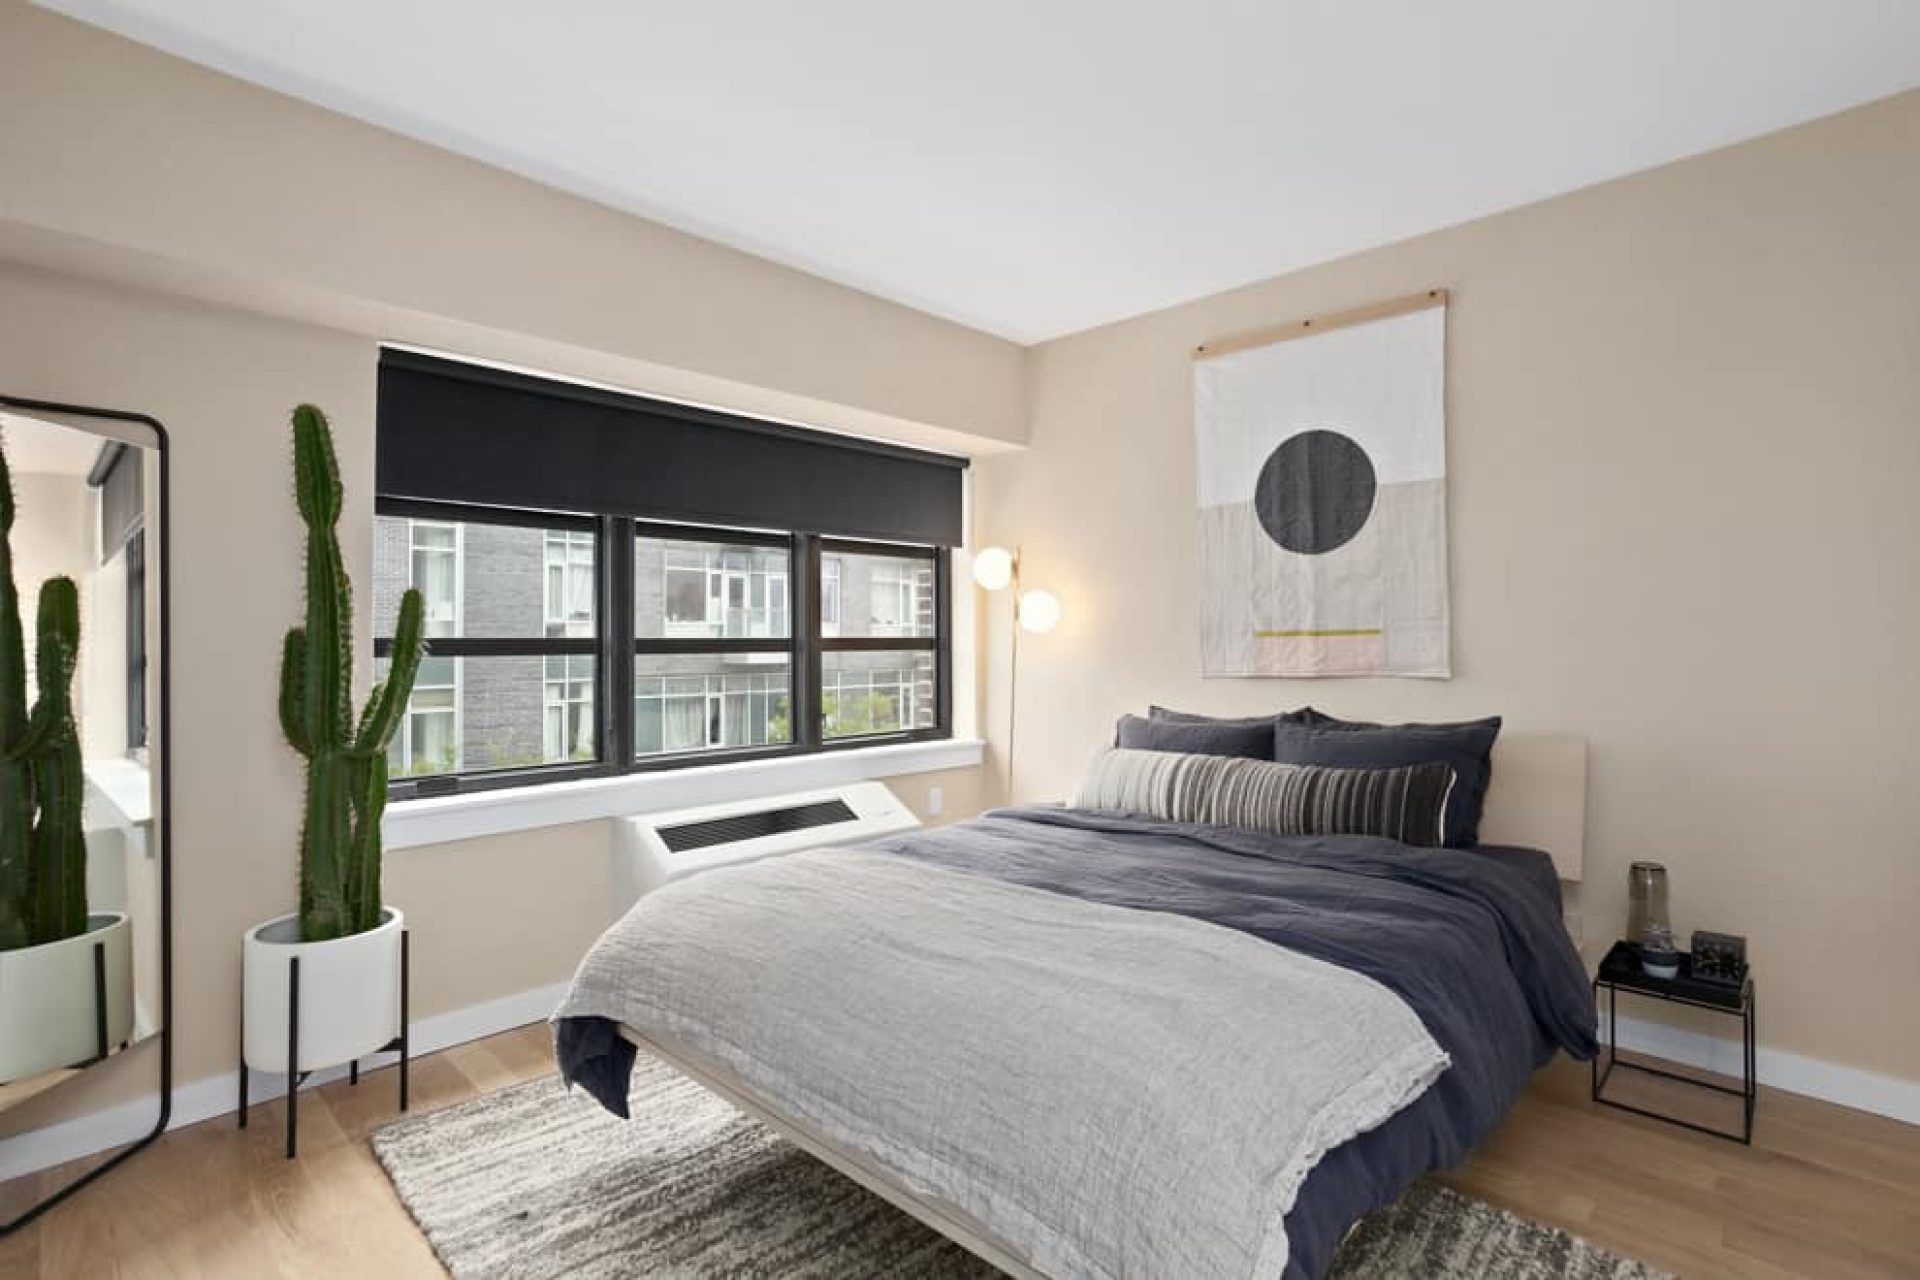 Bedroom at 66 Ainslie Street apartments in Brooklyn with a queen bed, matching bed side tables, mirror and hardwood floors.